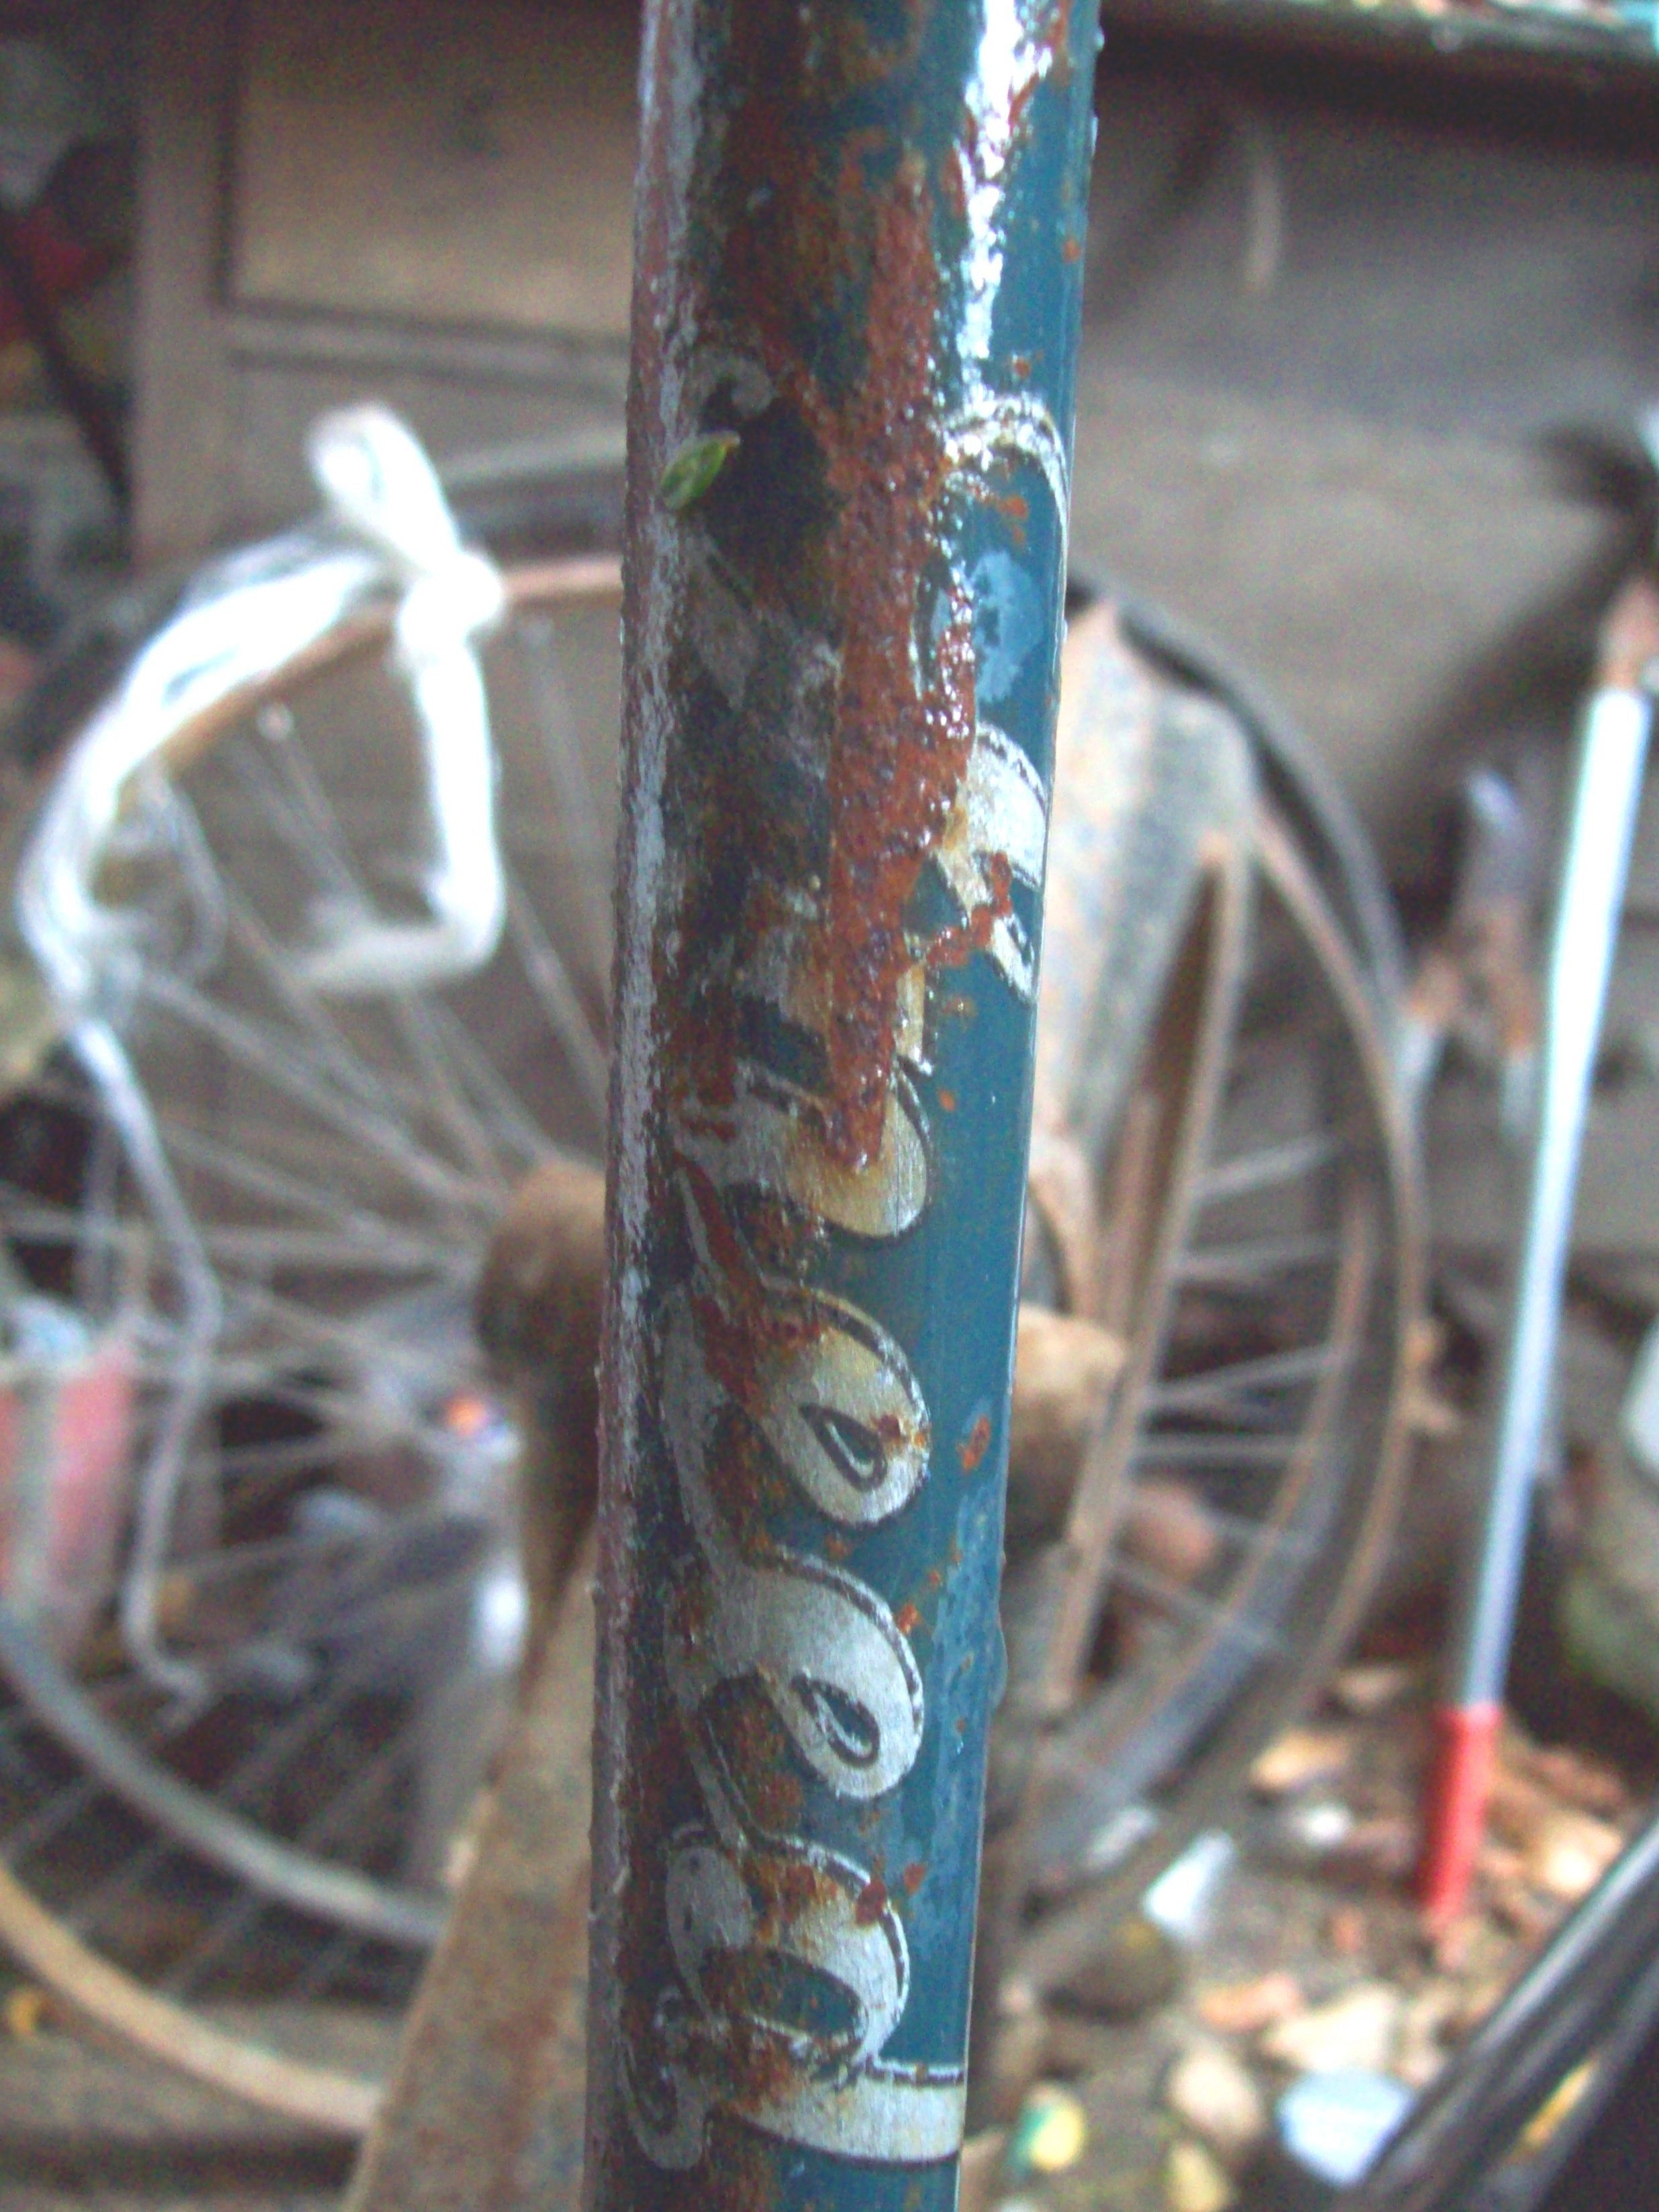 Speed decal - pre war somme bicyclette - photo